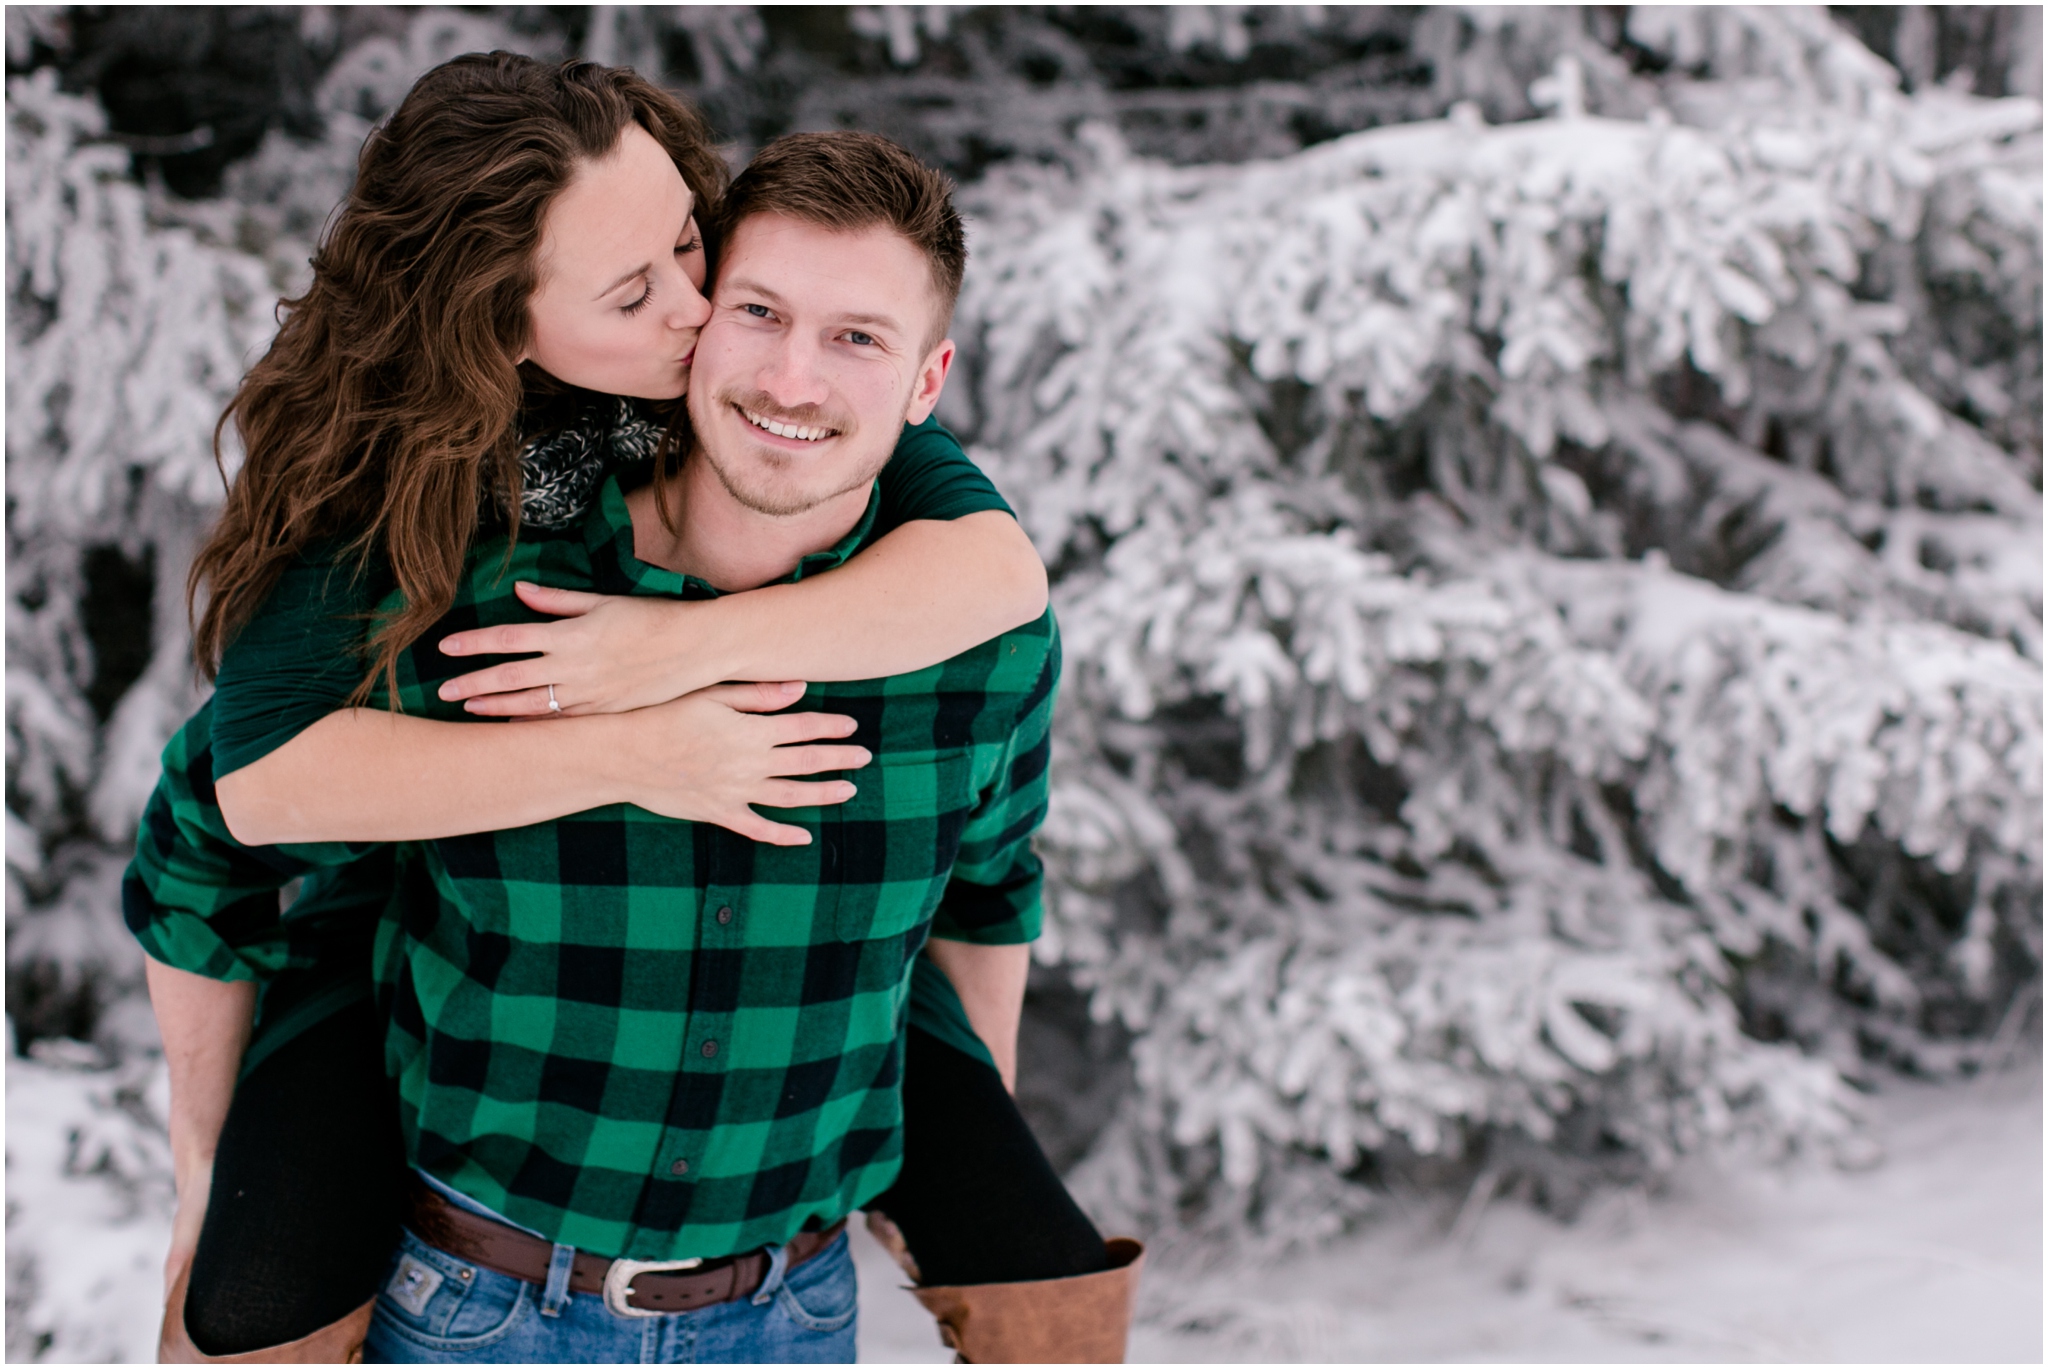 Minnesota Winter Engagement Photography, Brittney and Caleb